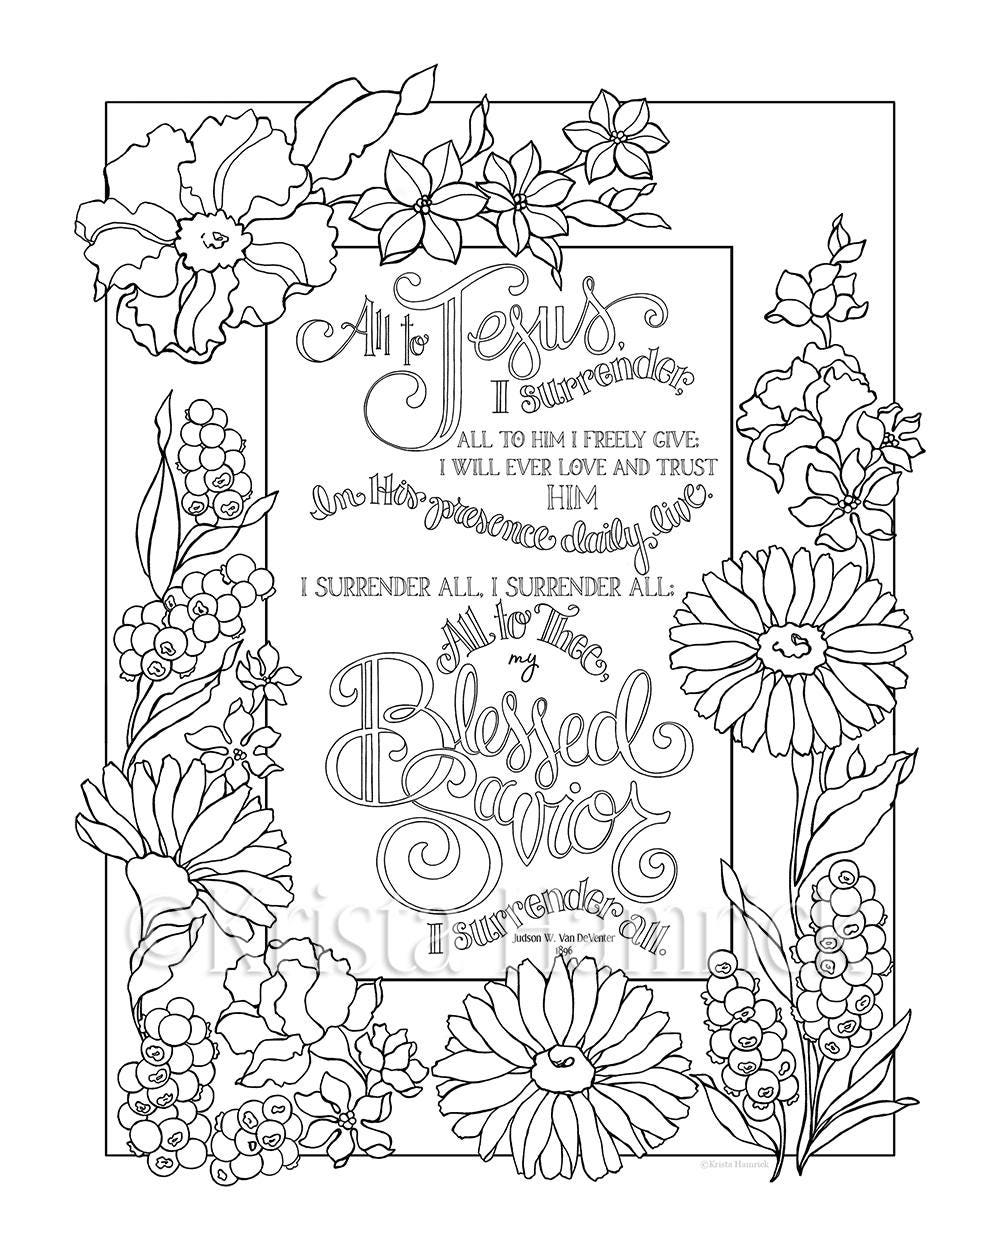 I Surrender All Coloring Page In Two Sizes 8 5x11 Bible Etsy